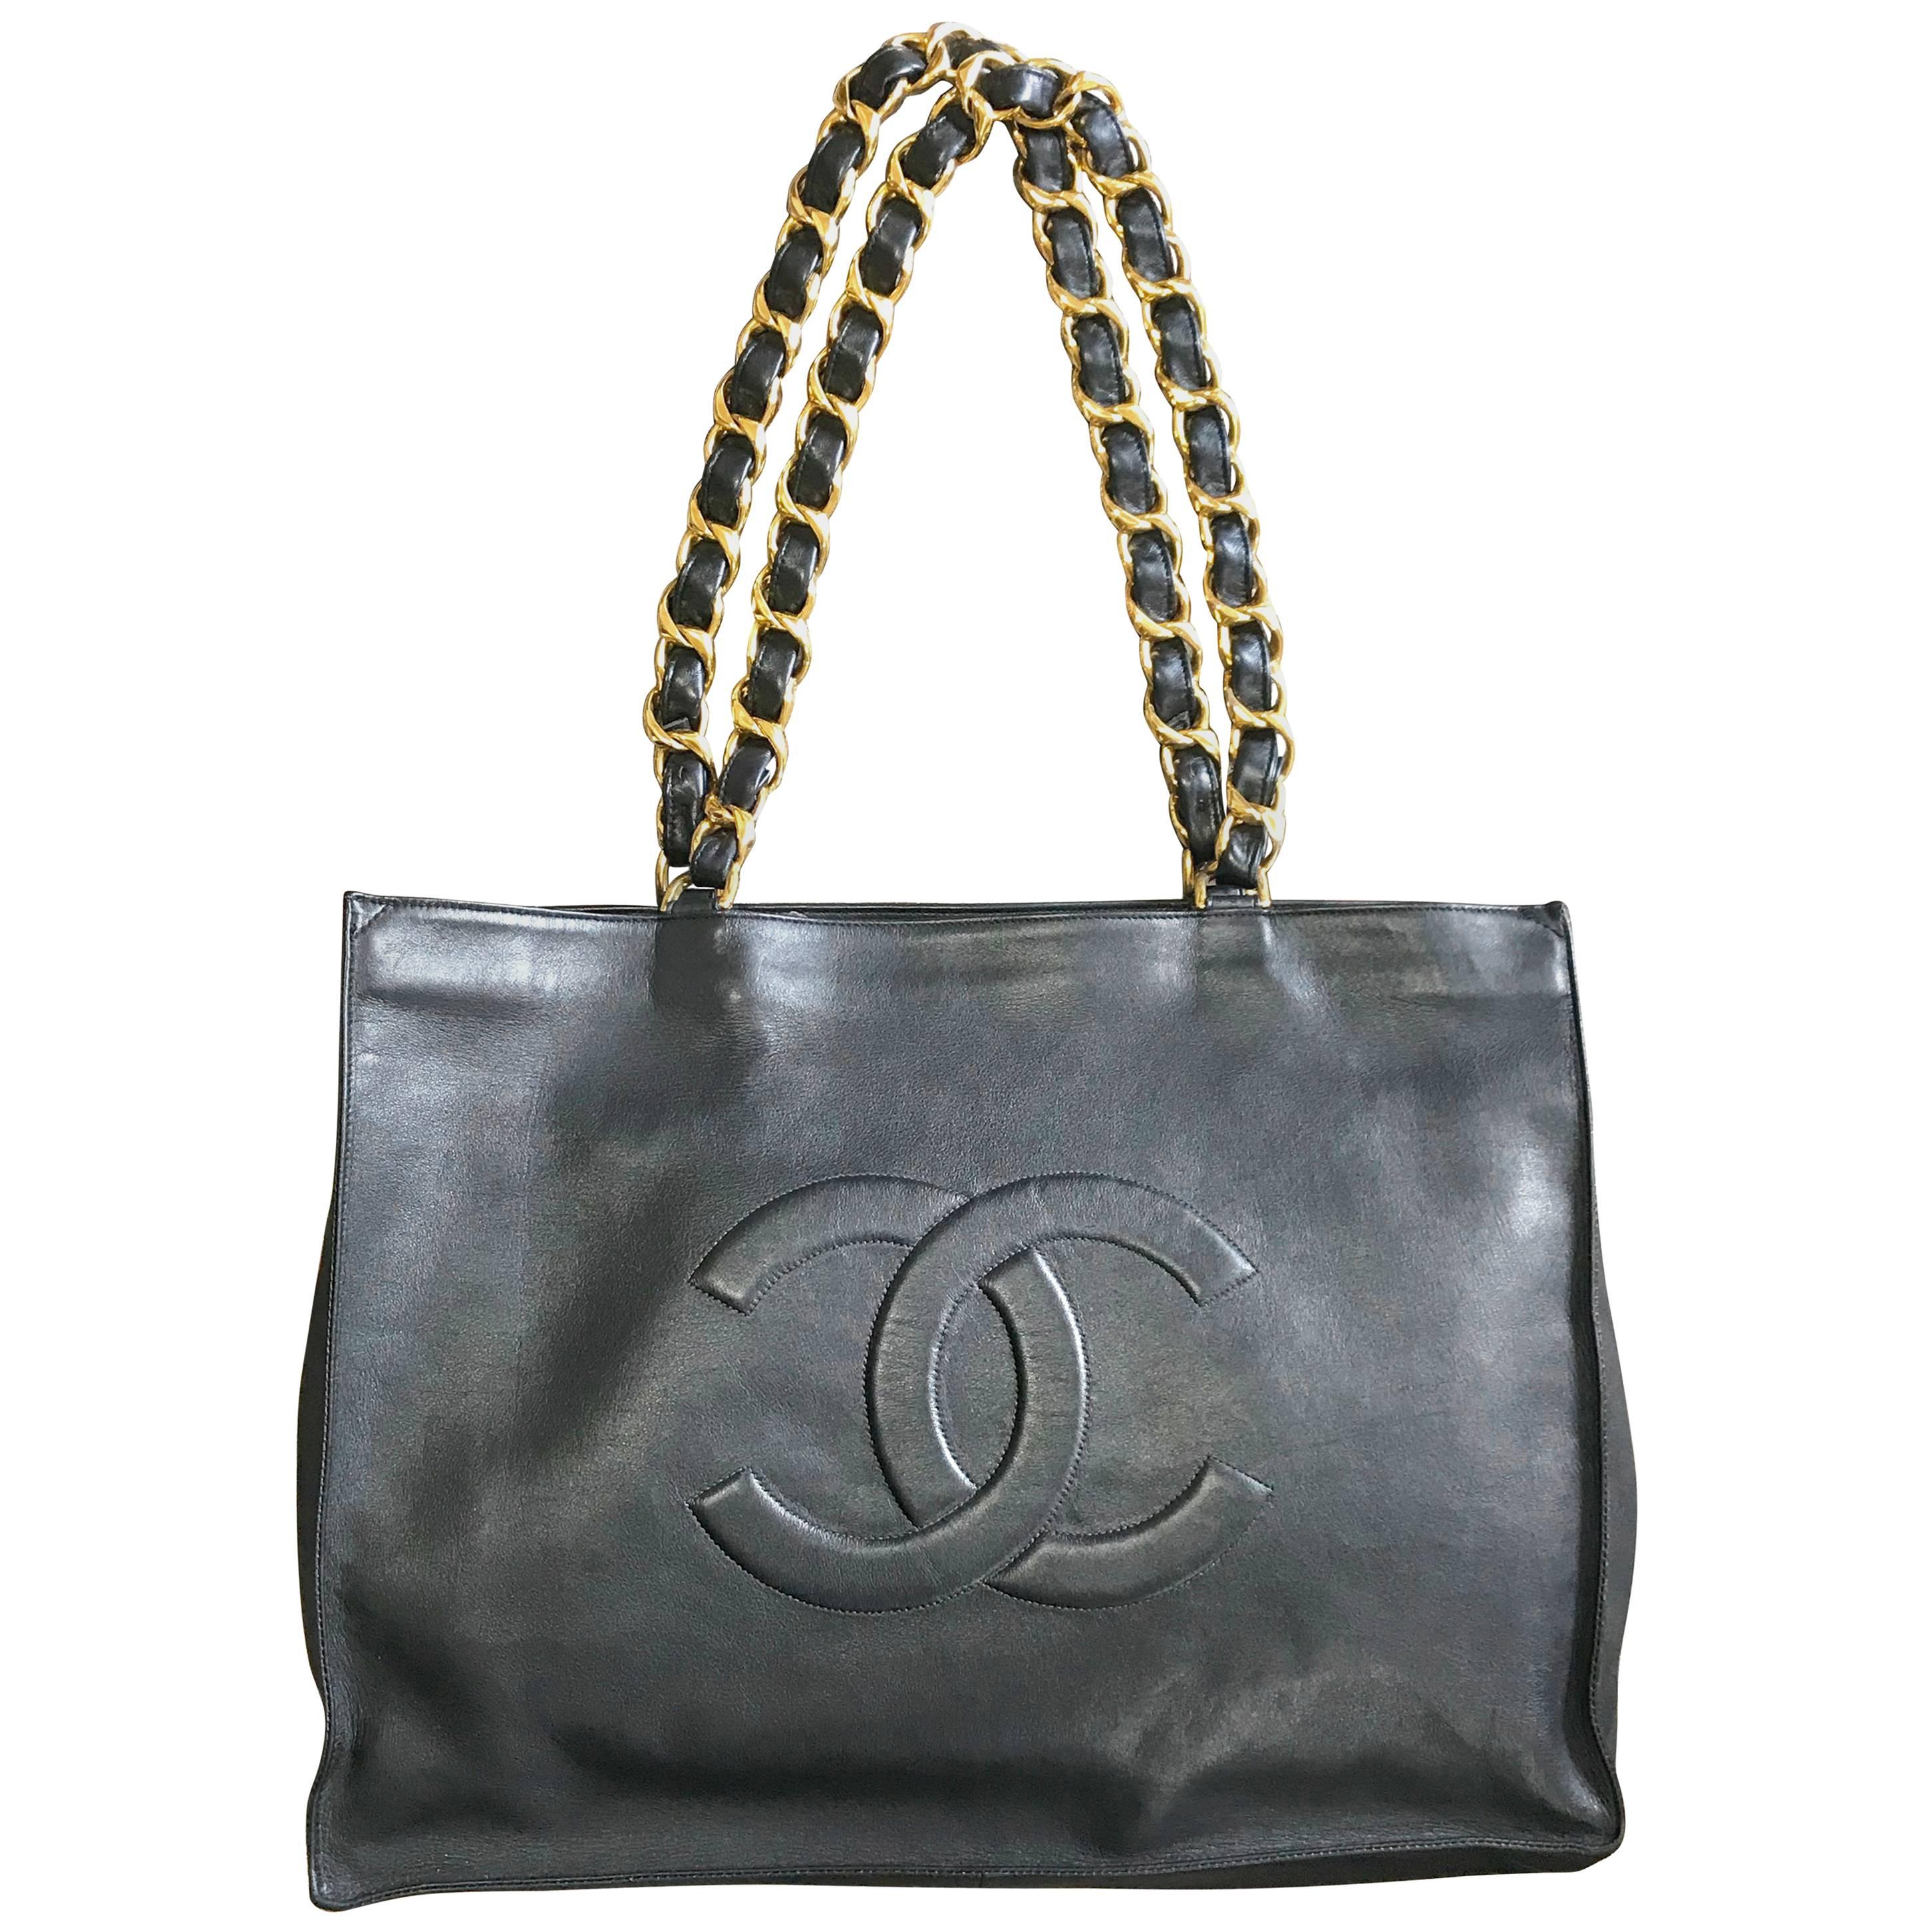 Chanel Vintage black calfskin large tote bag with gold tone chain handles and CC